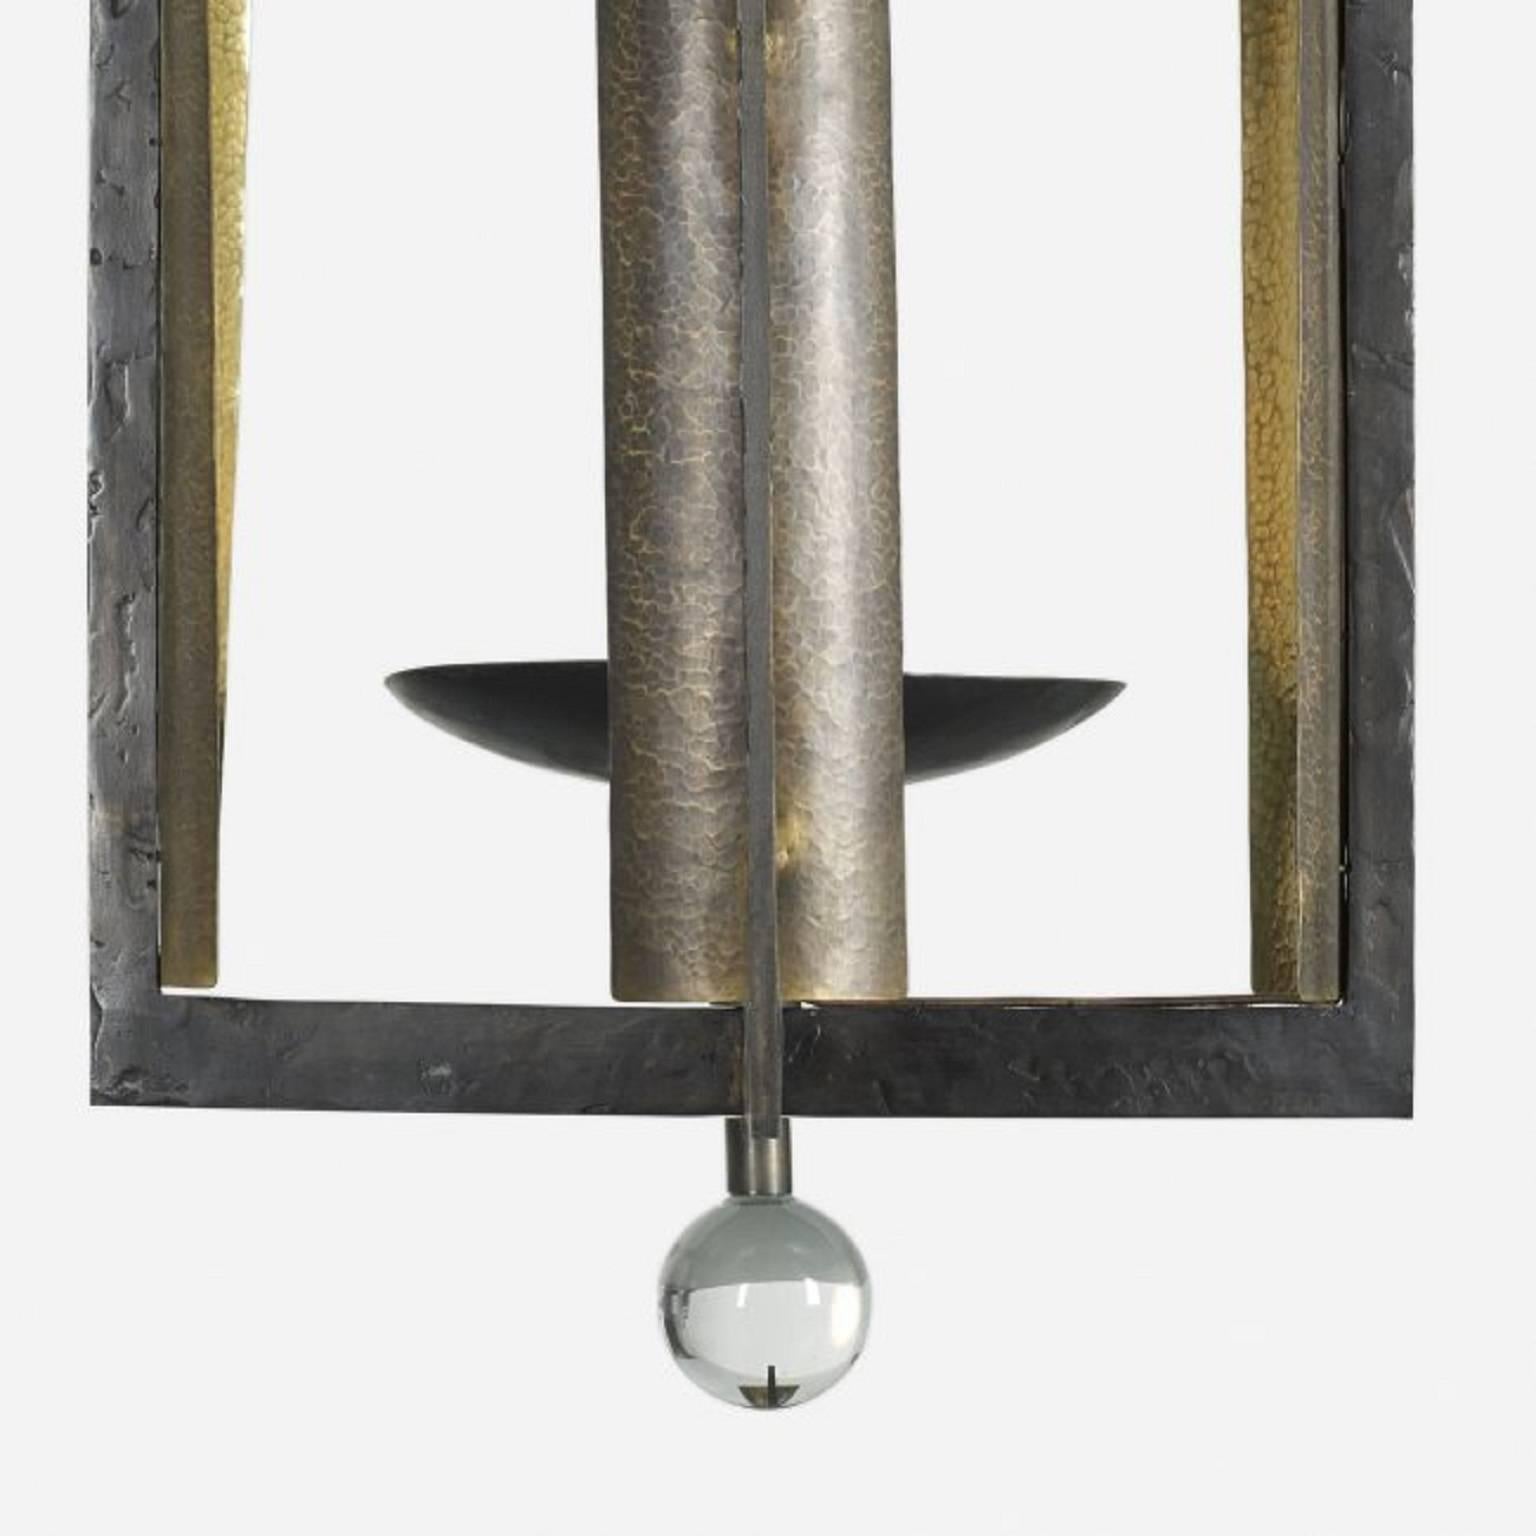 Hervé Van der Straeten chandelier from a Robert Couturier Interior
Patinated brass, hammered copper, crystal,
France, 2002-2006.
Signed with artist's cipher to applied label on fixture: [HV].

Commissioned by Robert Coururier.